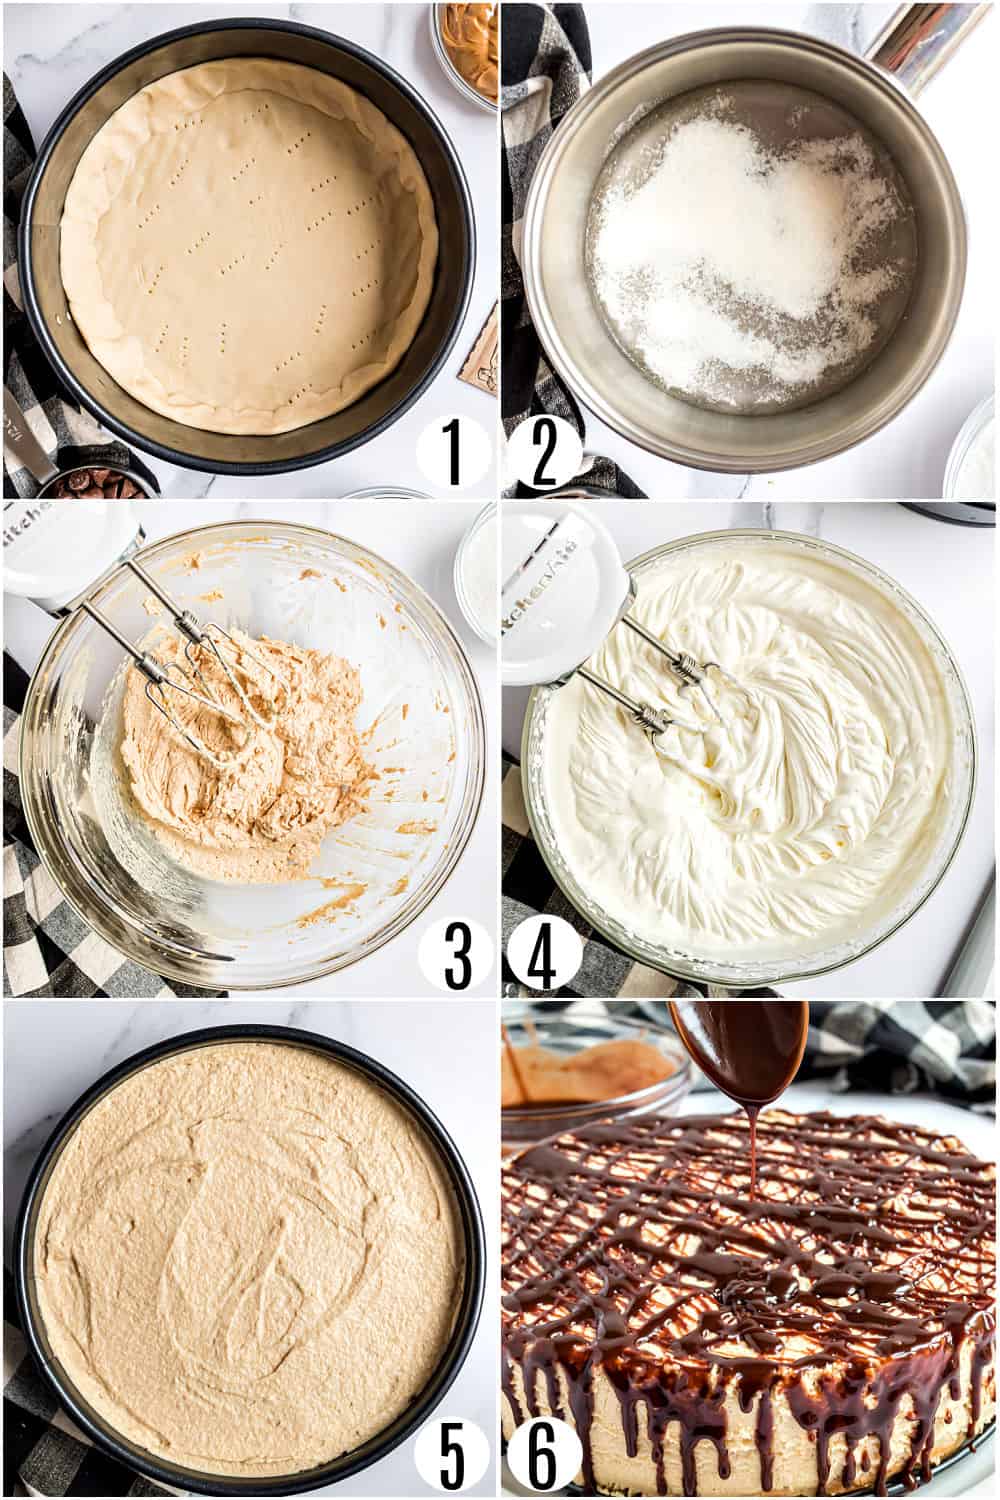 Step by step photos showing how to make peanut butter pie.